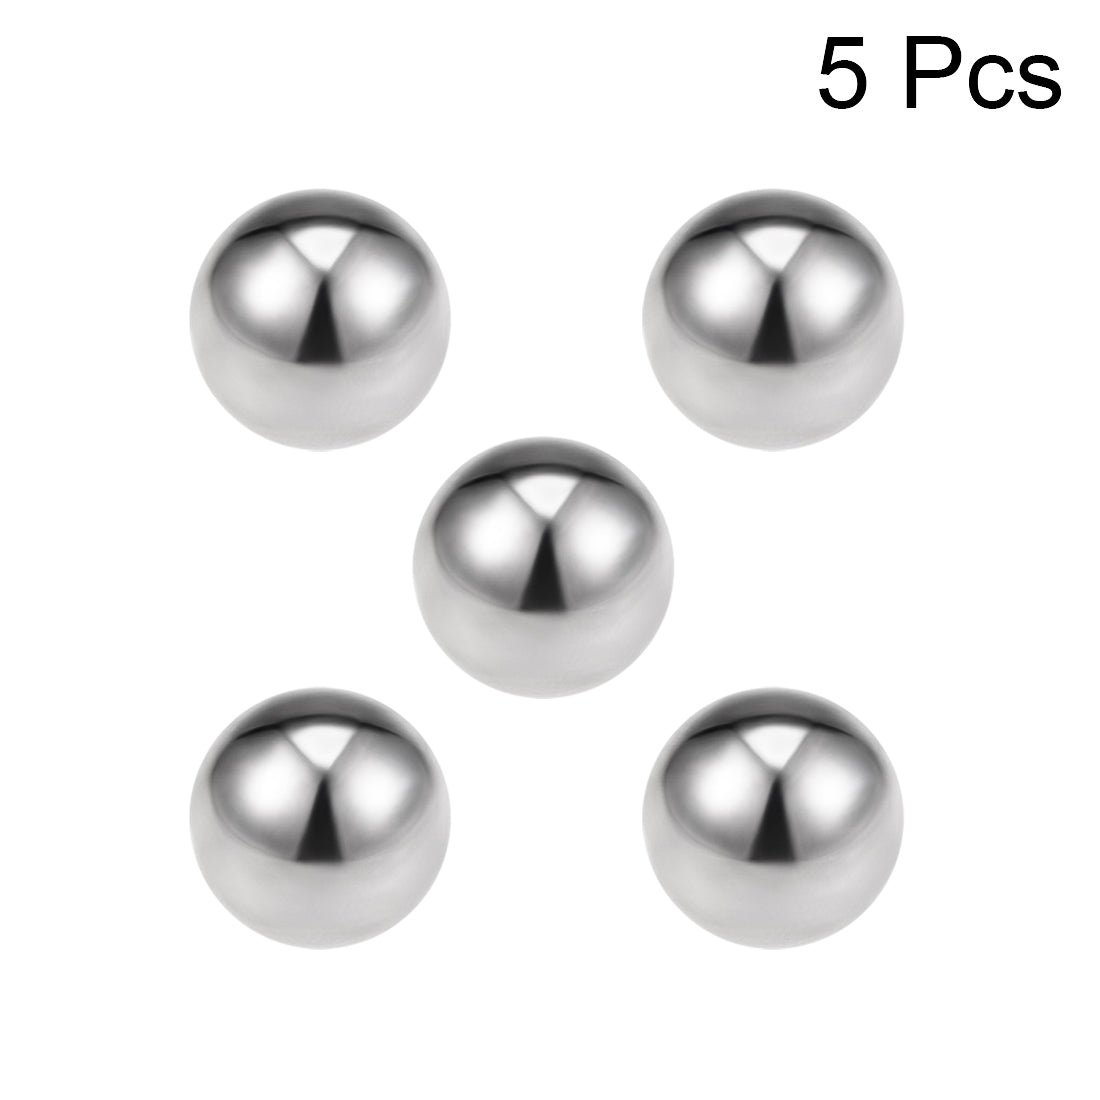 Uxcell Uxcell 5/8" Bearing Balls 440C Stainless Steel G25 Precision Balls 5pcs